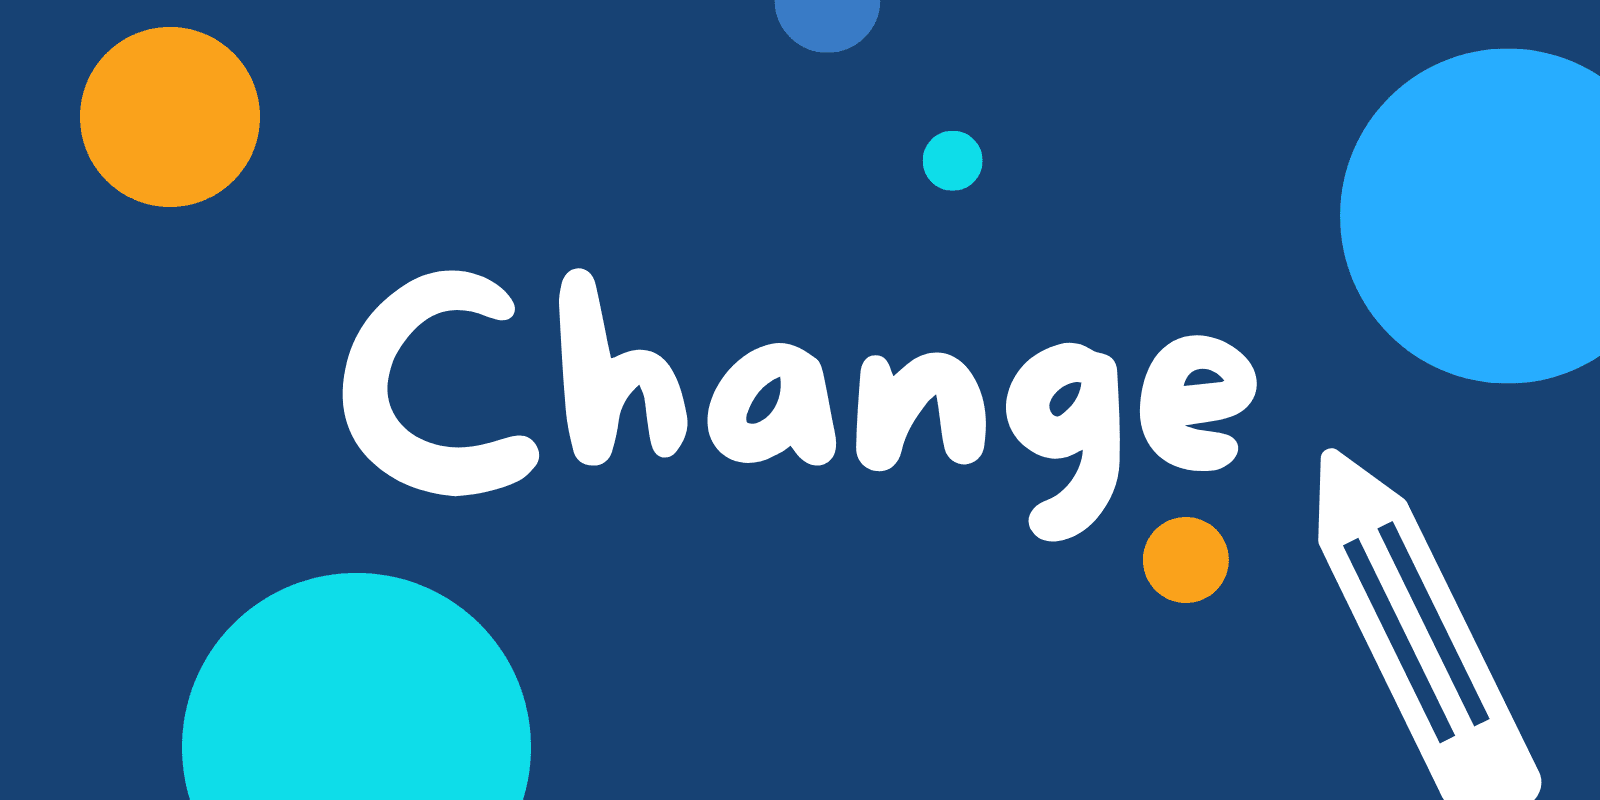 Change written with a chalk in a decorative background